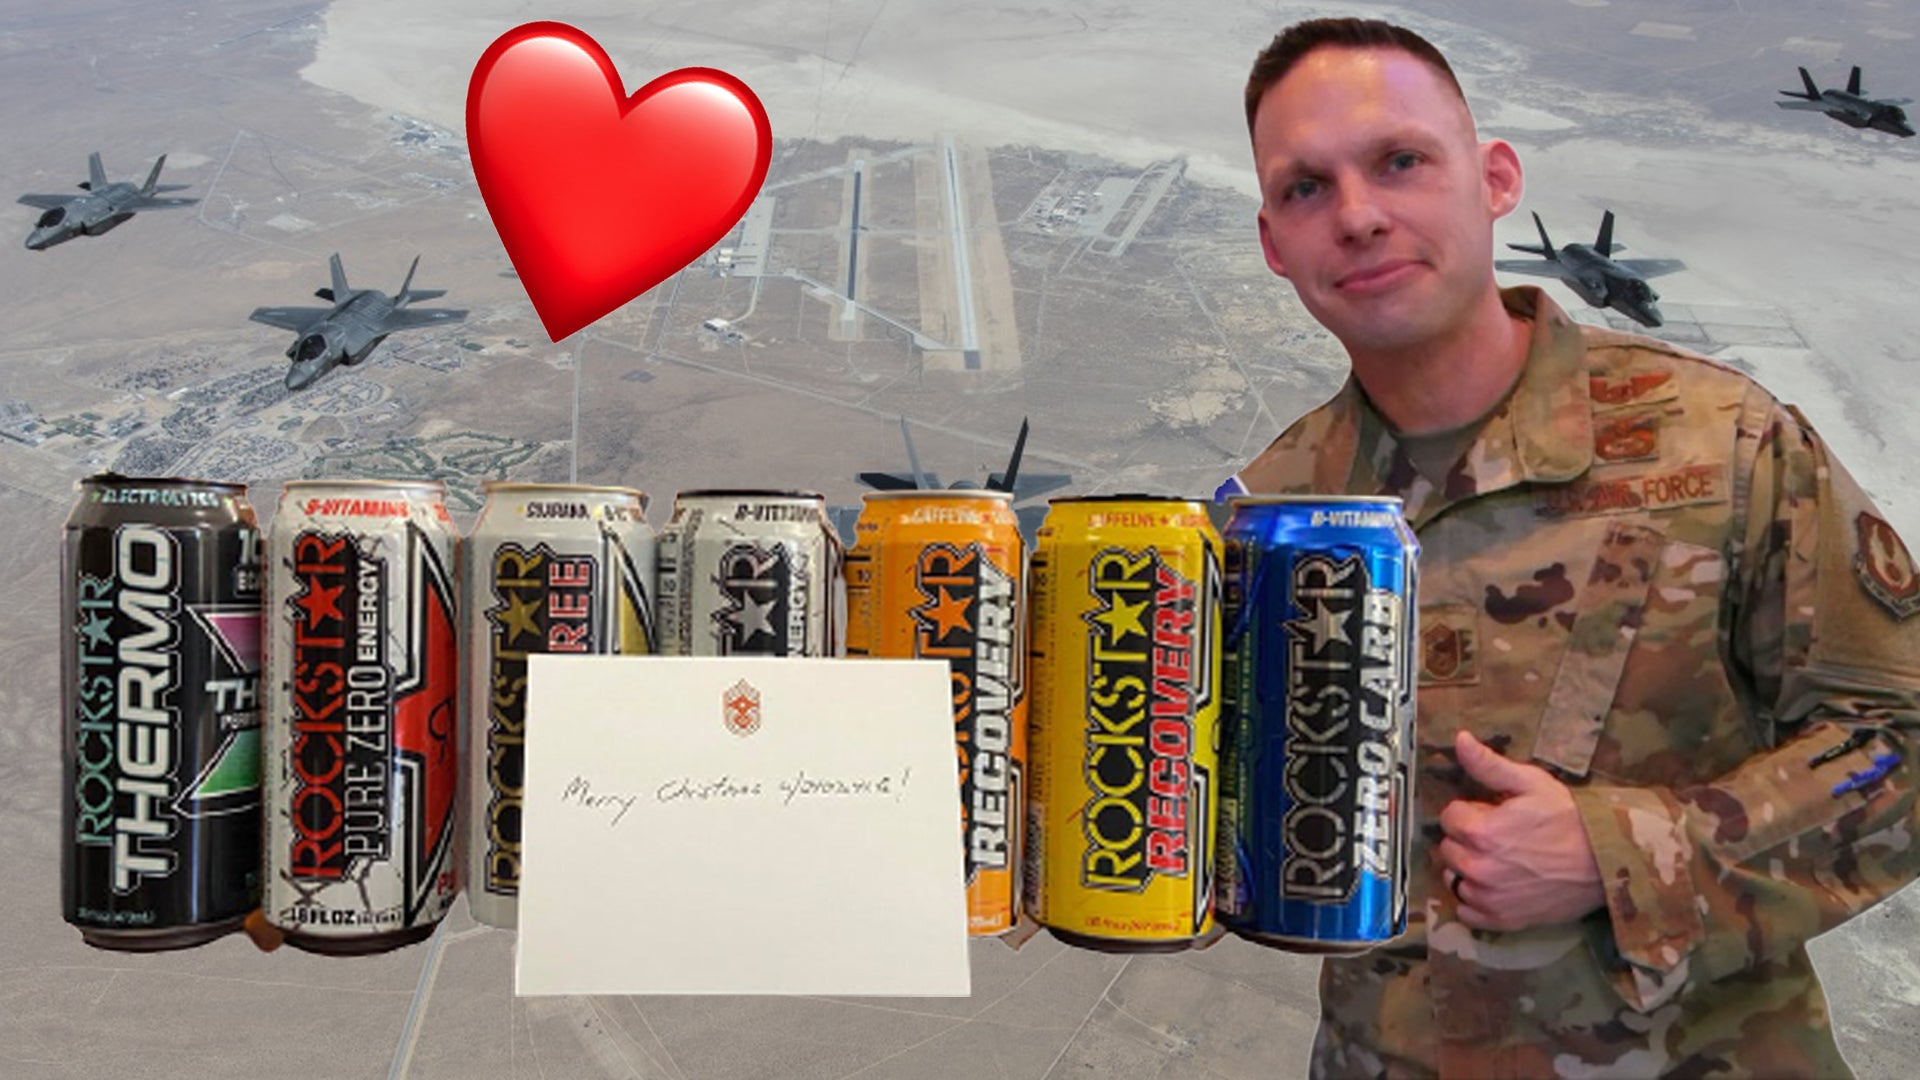 We salute the Air Force chief who smoked turkeys and bought Rockstars for his airmen when the commissary ran out